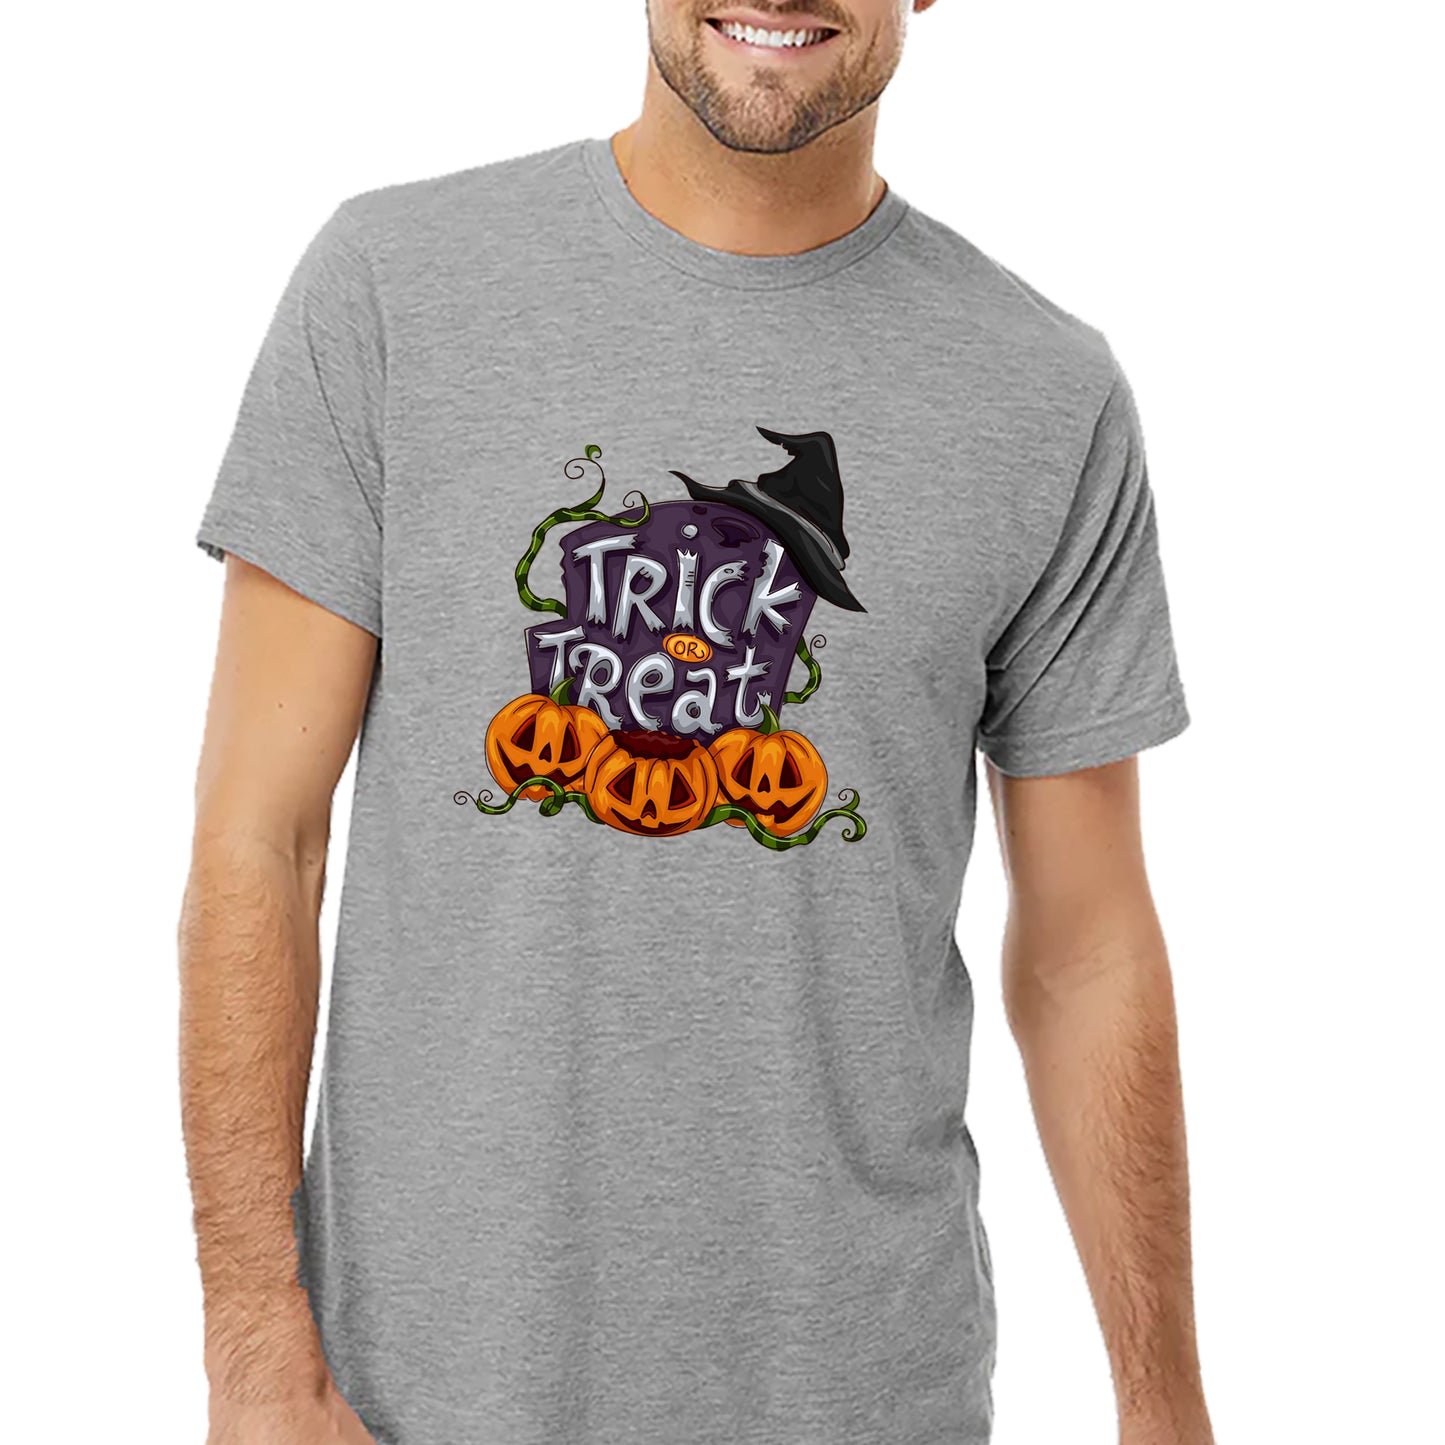 Trick or Treat T-shirt